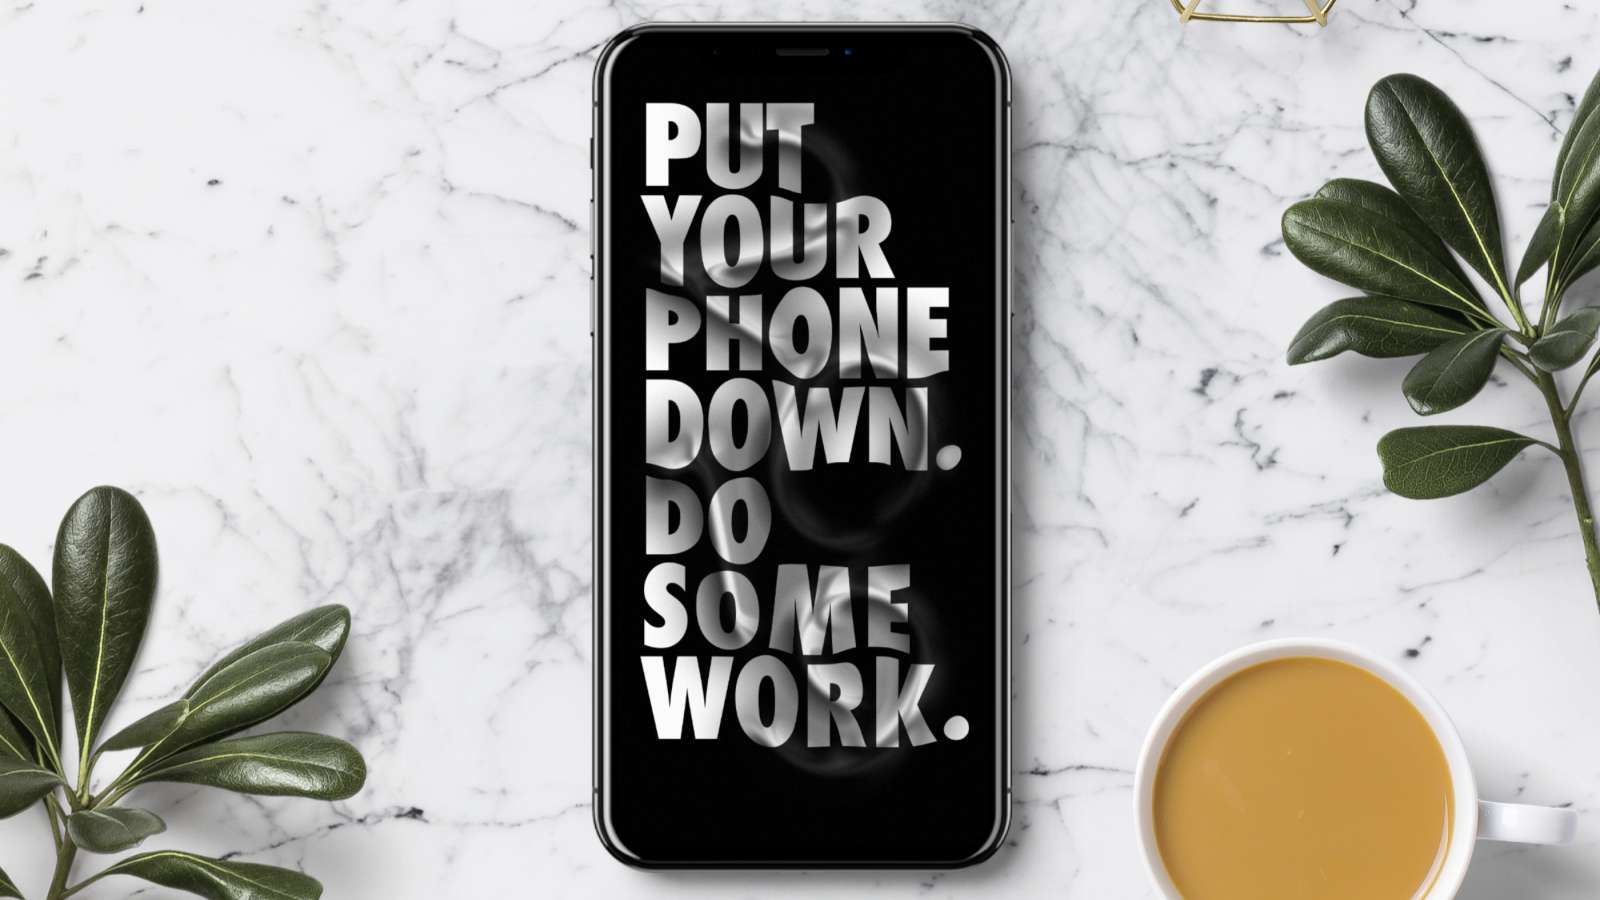 Lovely Wallpapers By Jordan Metcalf For 21wallpaper - Put Your Phone Down Do Some Work - HD Wallpaper 